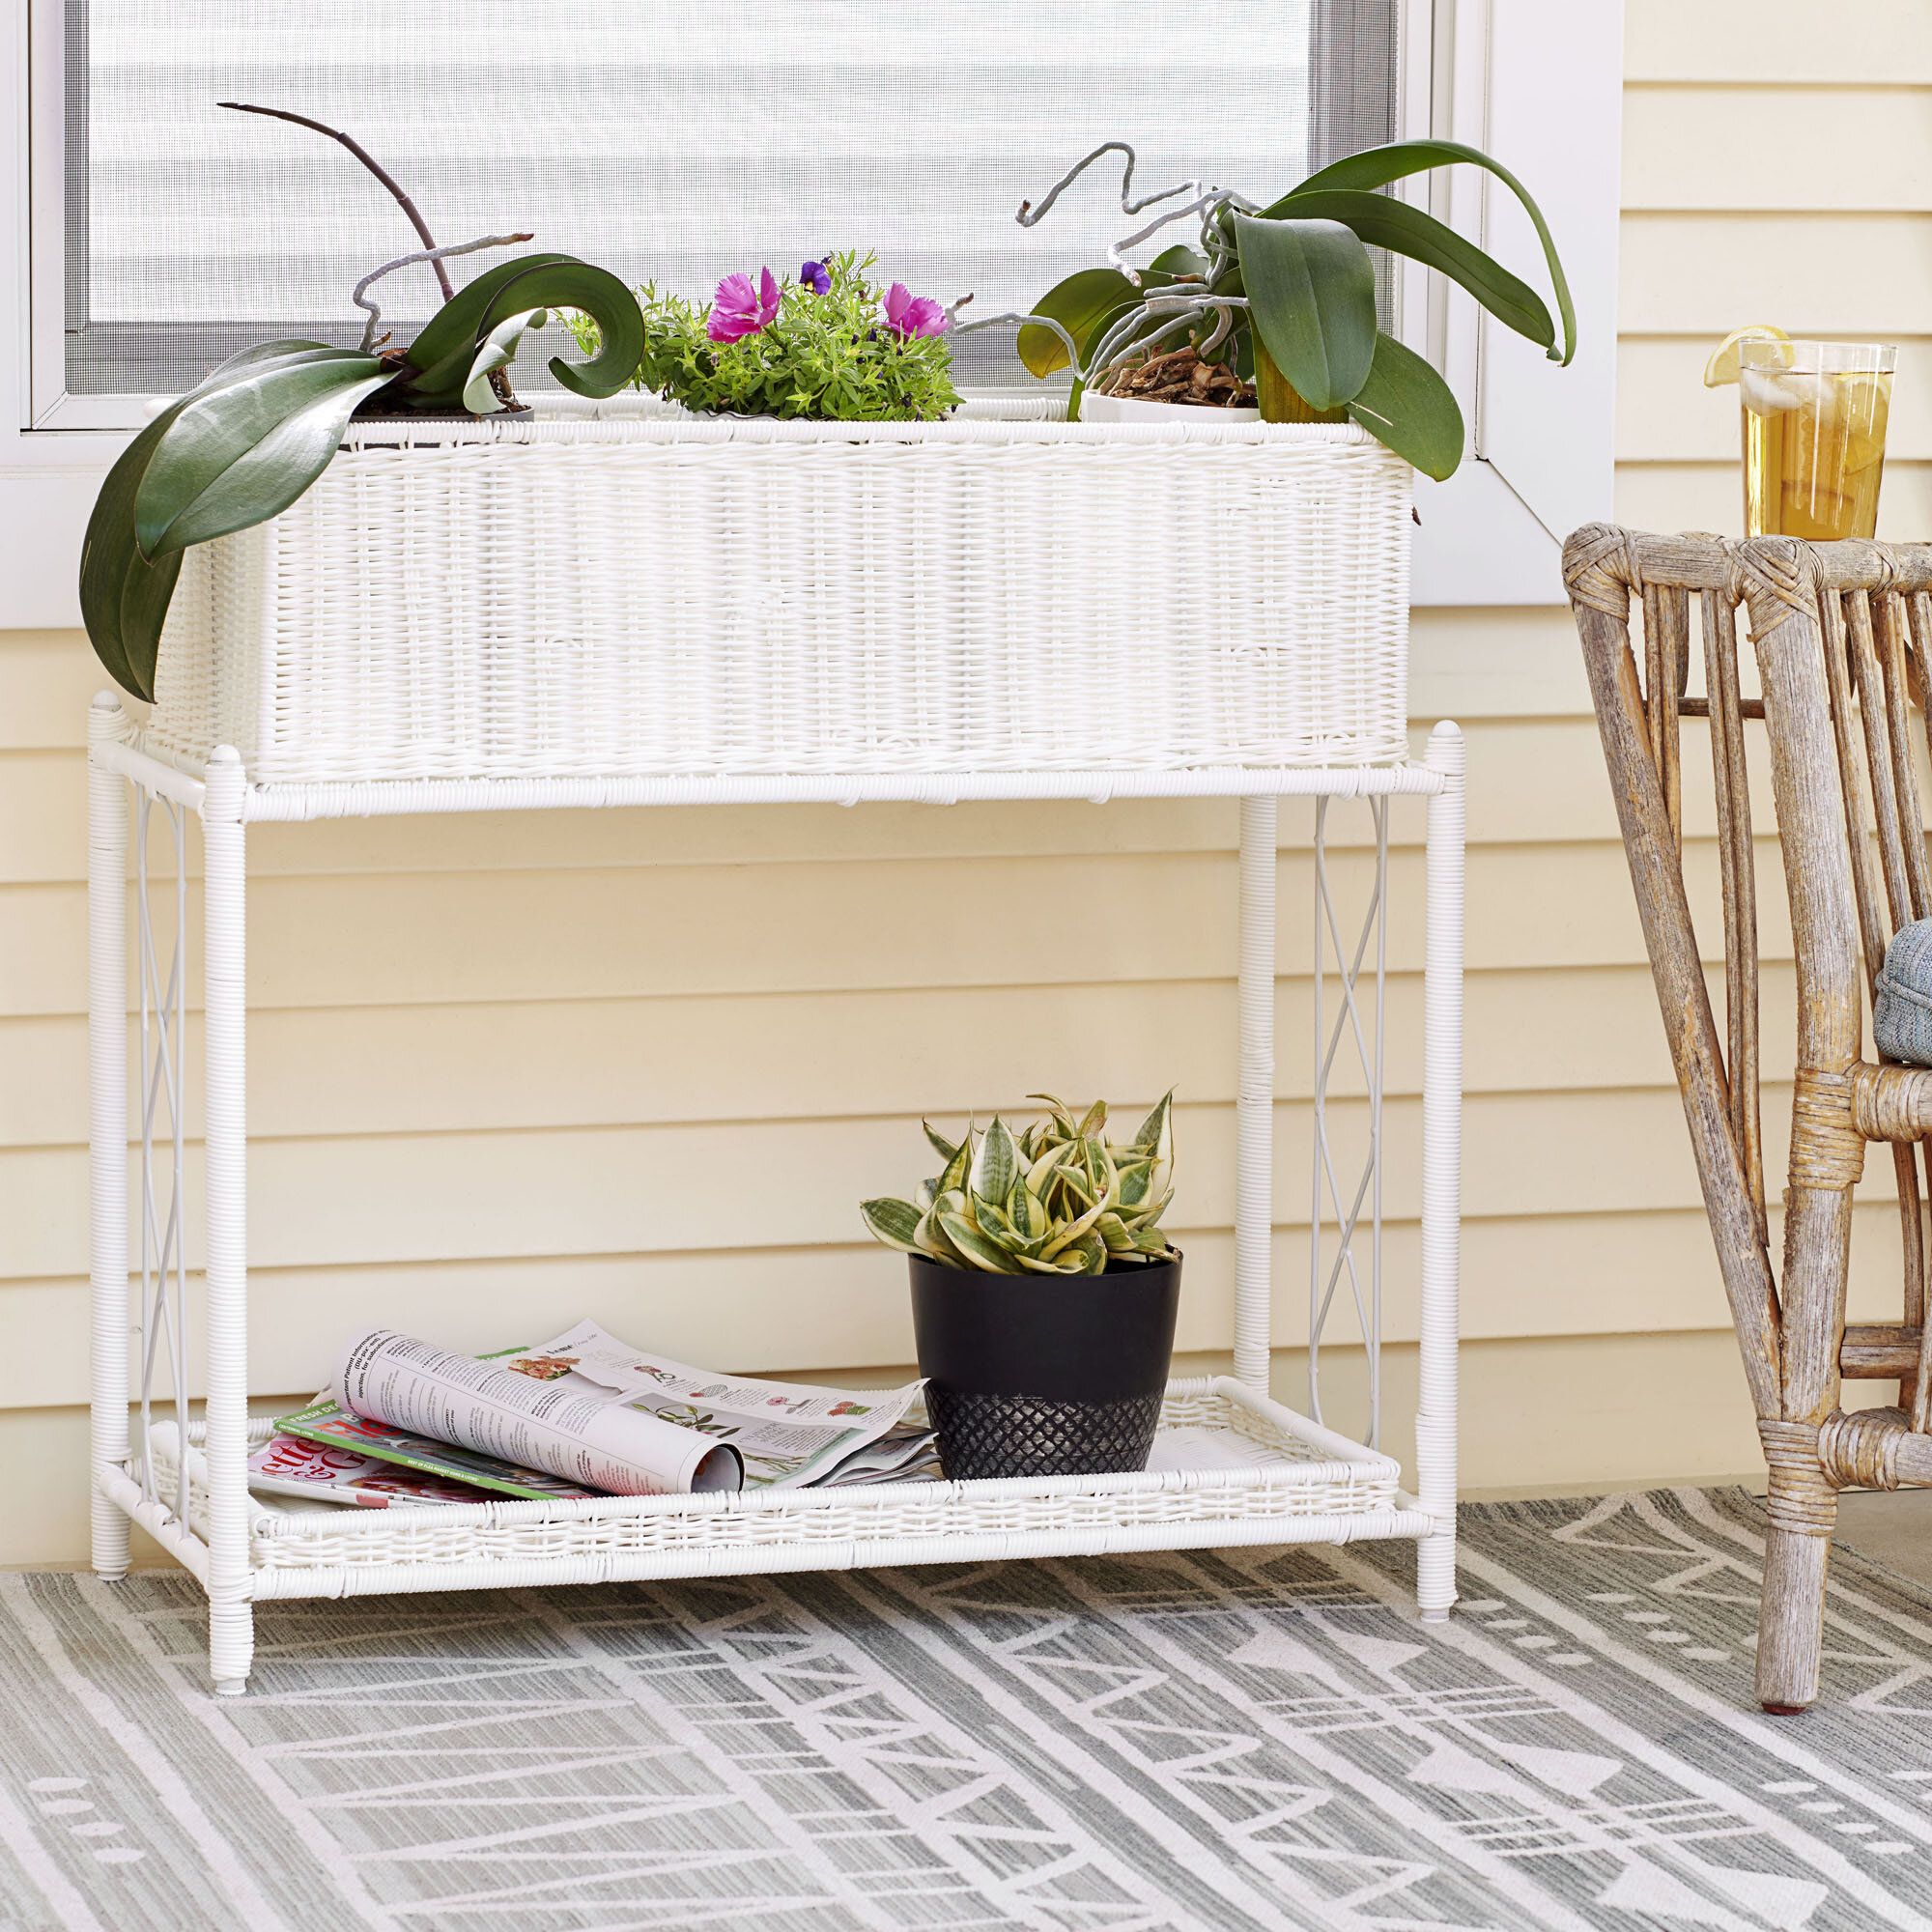 Highland Dunes Garza Resin Elevated Planter & Reviews | Wayfair In Resin Plant Stands (Photo 15 of 15)